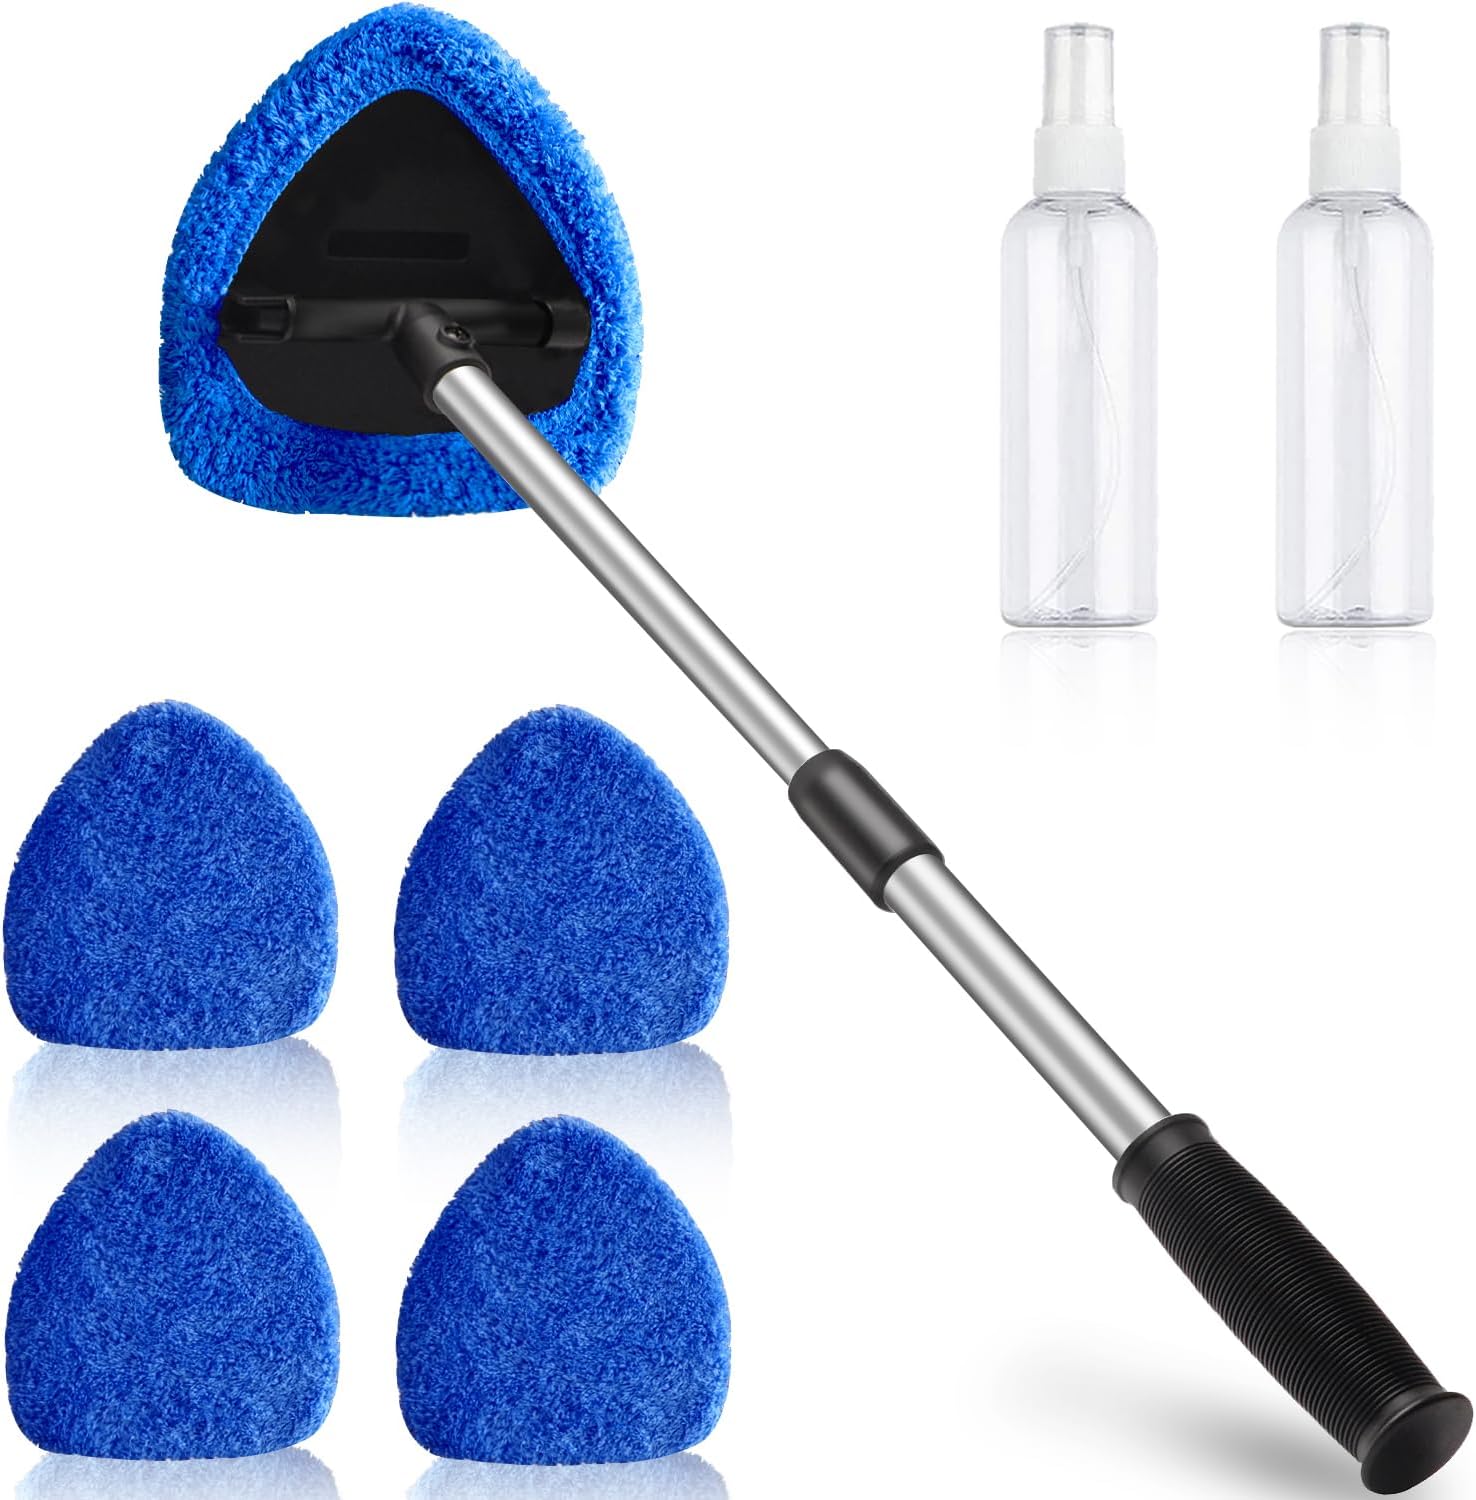 Walkfairy 25.6'' Extendable Longer Windshield Cleaning Tool, Stronger  Absorbent Car Window Cleaner with 5 pcs Washable Pads and 2 pcs 60ml Spray